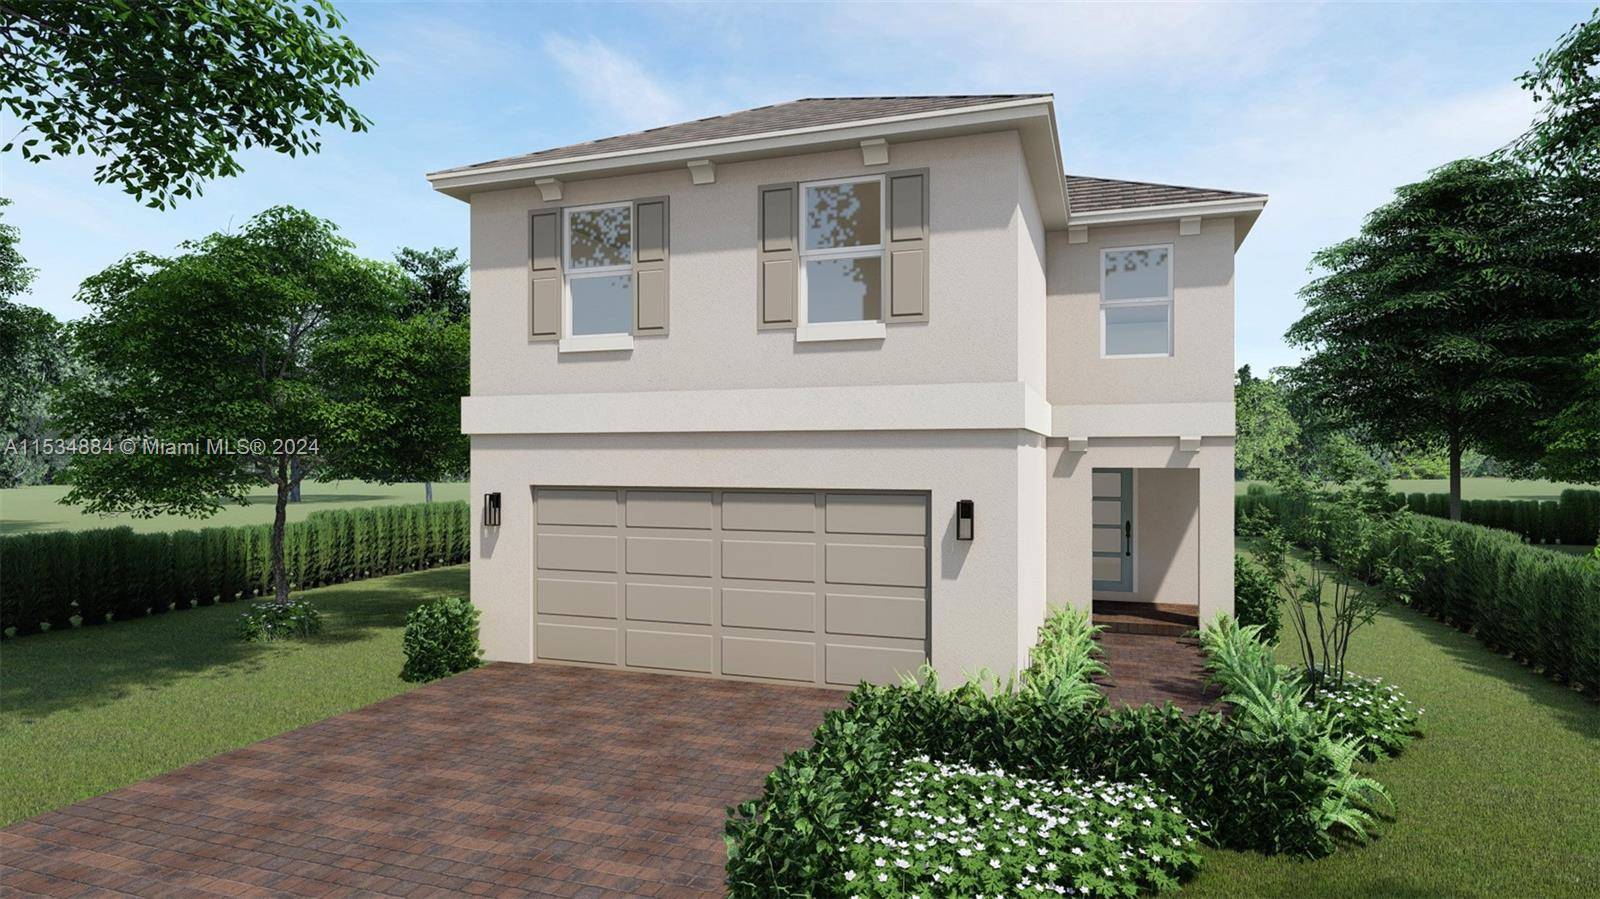 Brand new 4 bed, 2. 5 bath home with a 2 car garage.